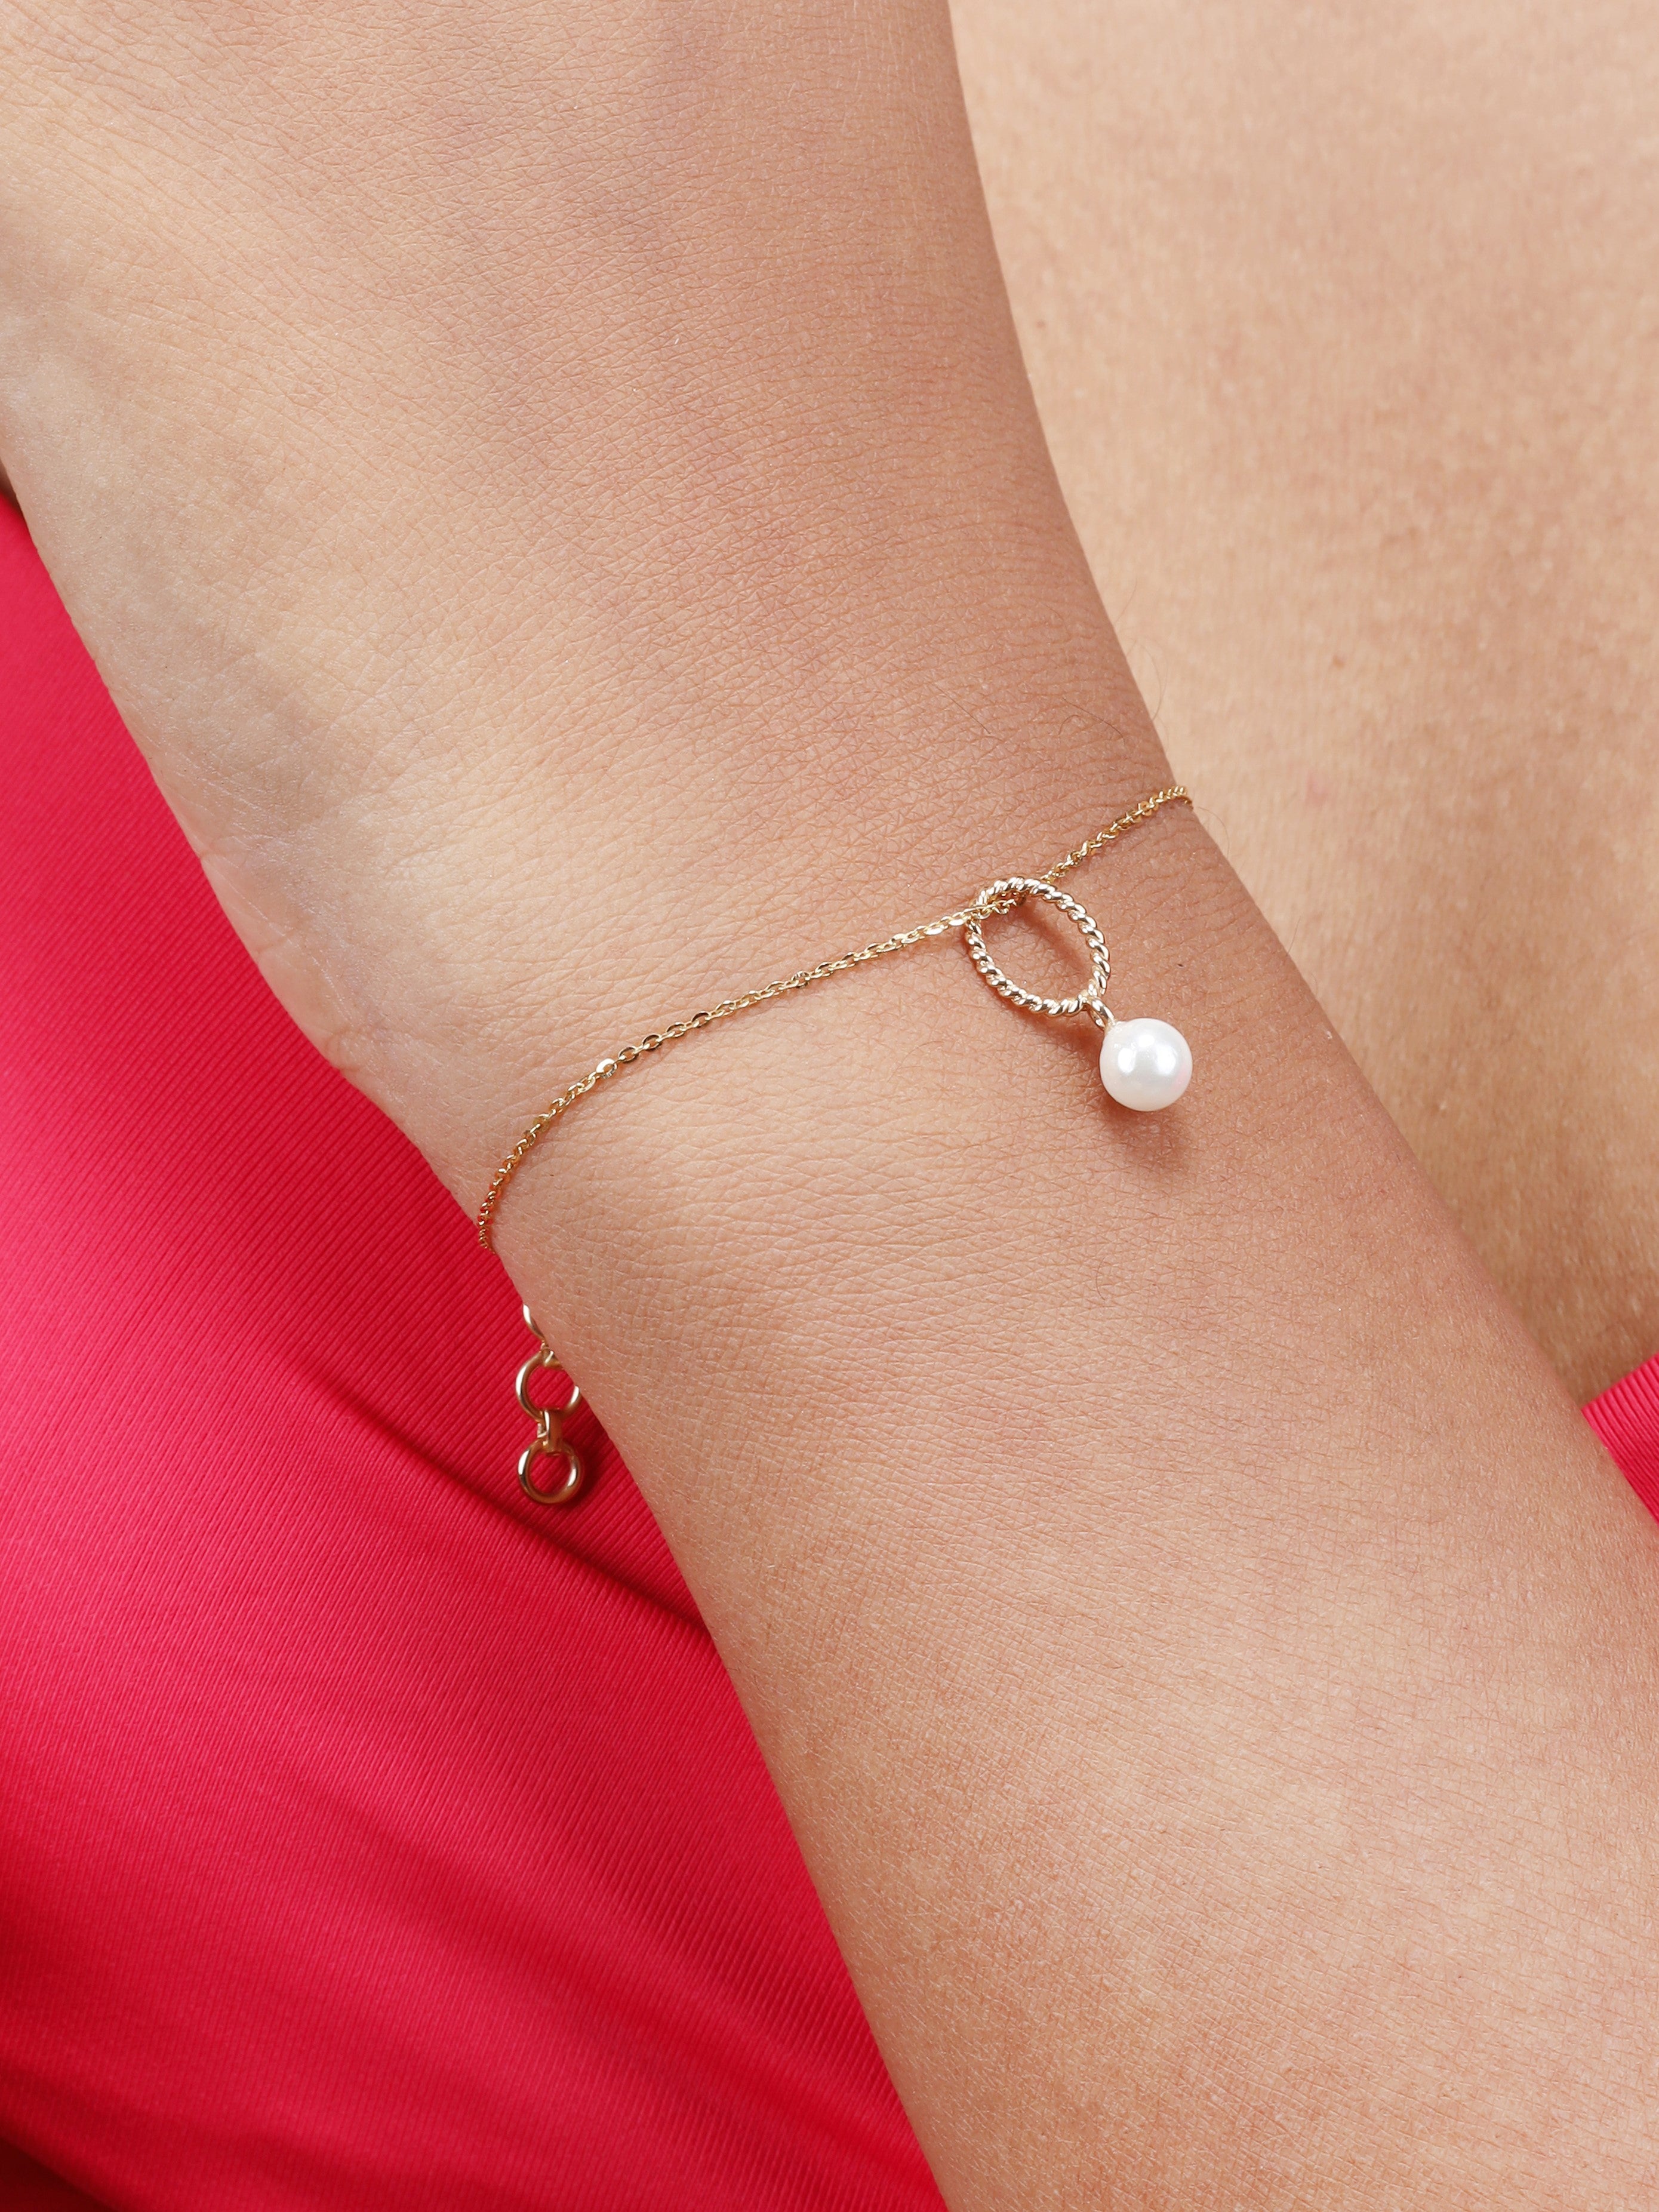 A Luxury Everyday Orb Adjustable Charm Bracelet Yellow Gold Minimalist  Simple Chain Bracelet at Rs 8400 in Surat